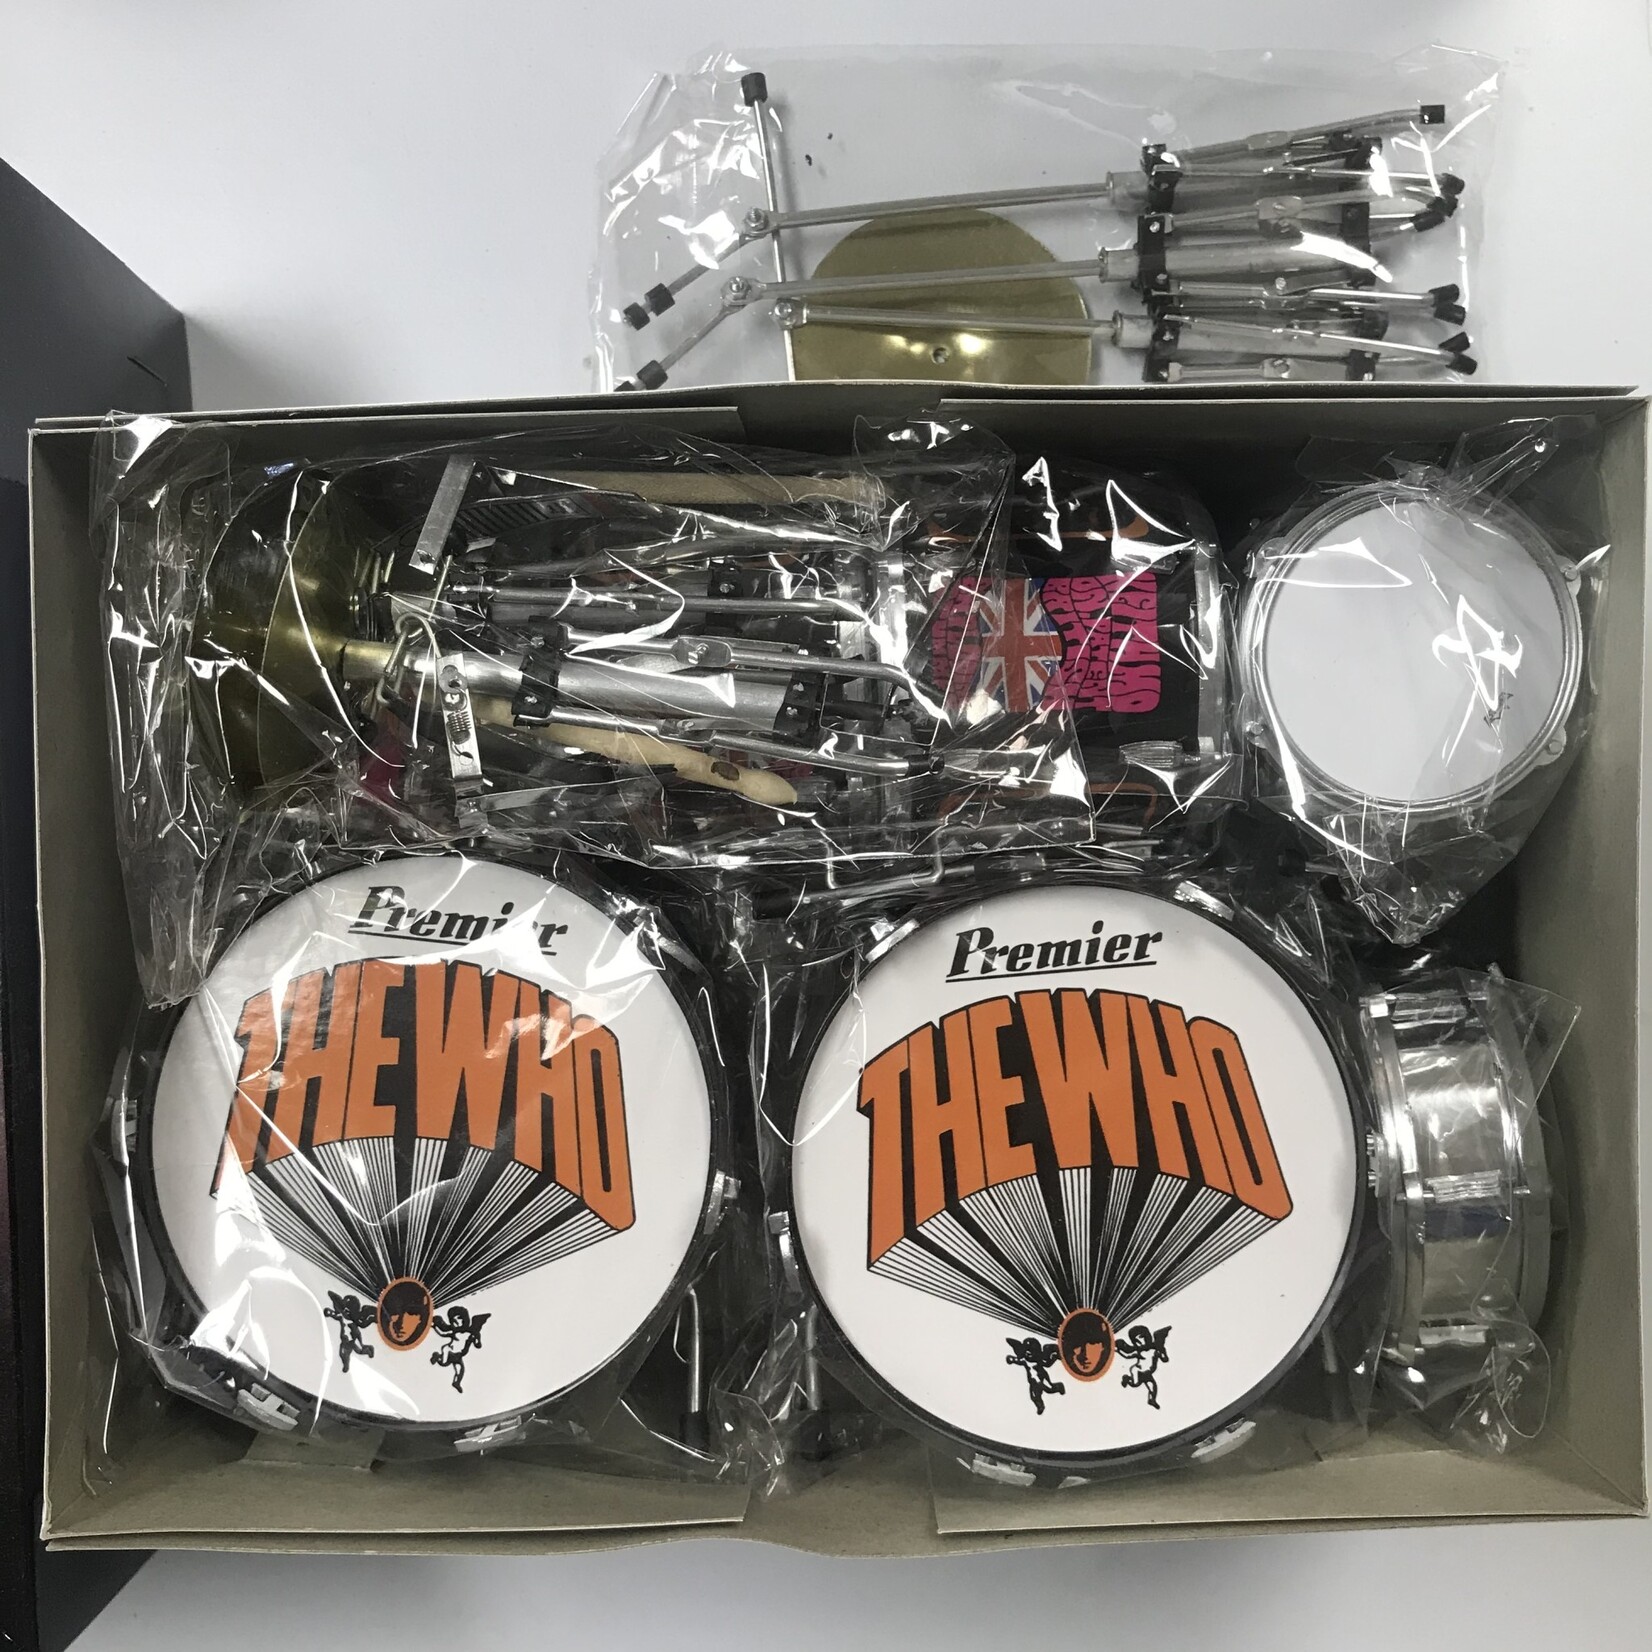 Who Keith Moon Drum Kit - Collectible Model (NEW)